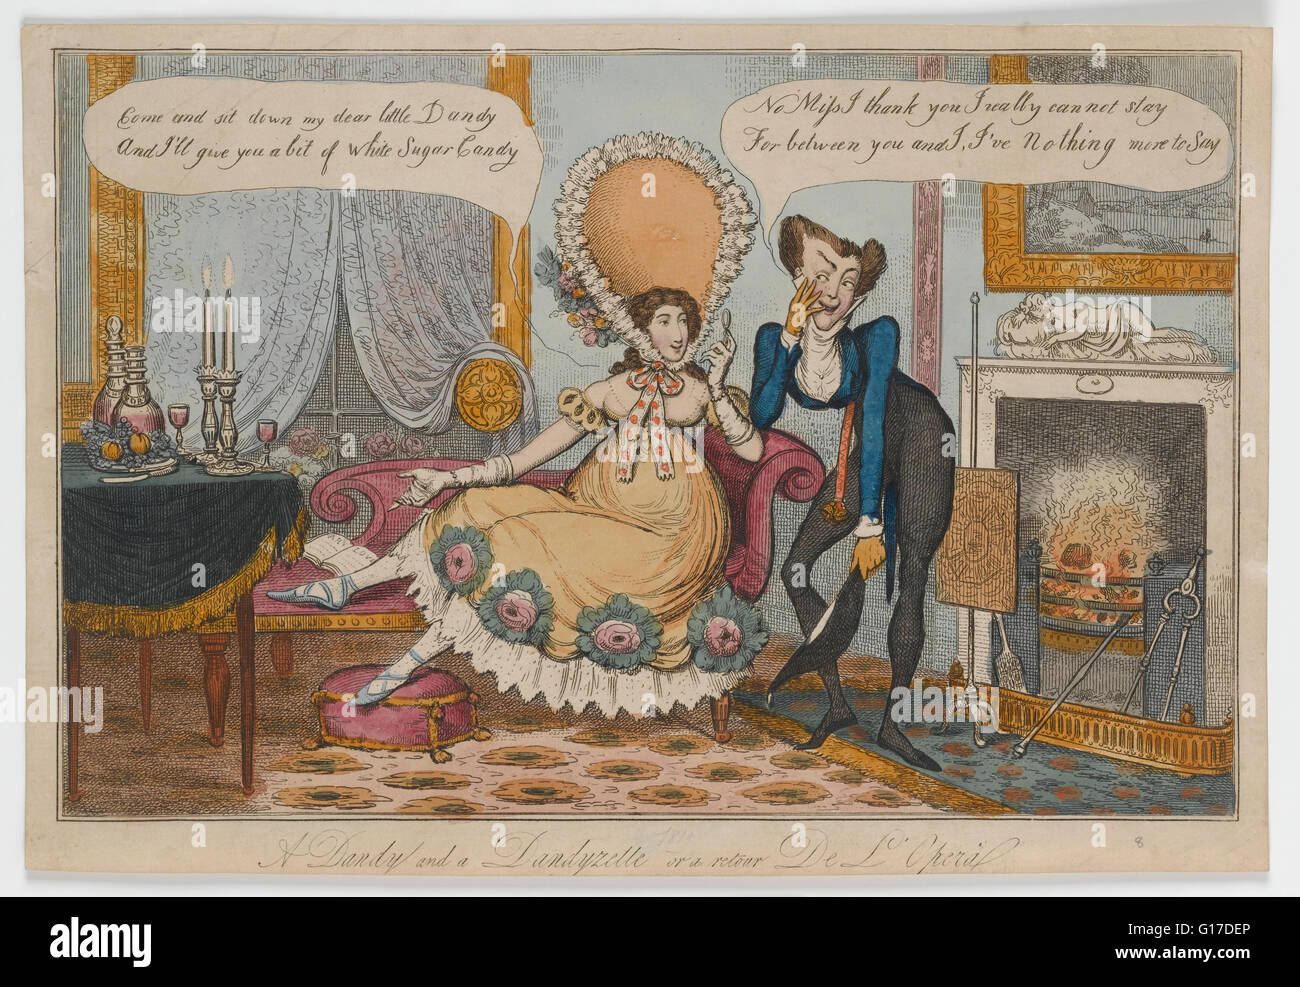 Coloured engraving on paper, entitled 'A Dandy and a Dandyzette or a retour De L'Opera', dated c.1820. Stock Photo